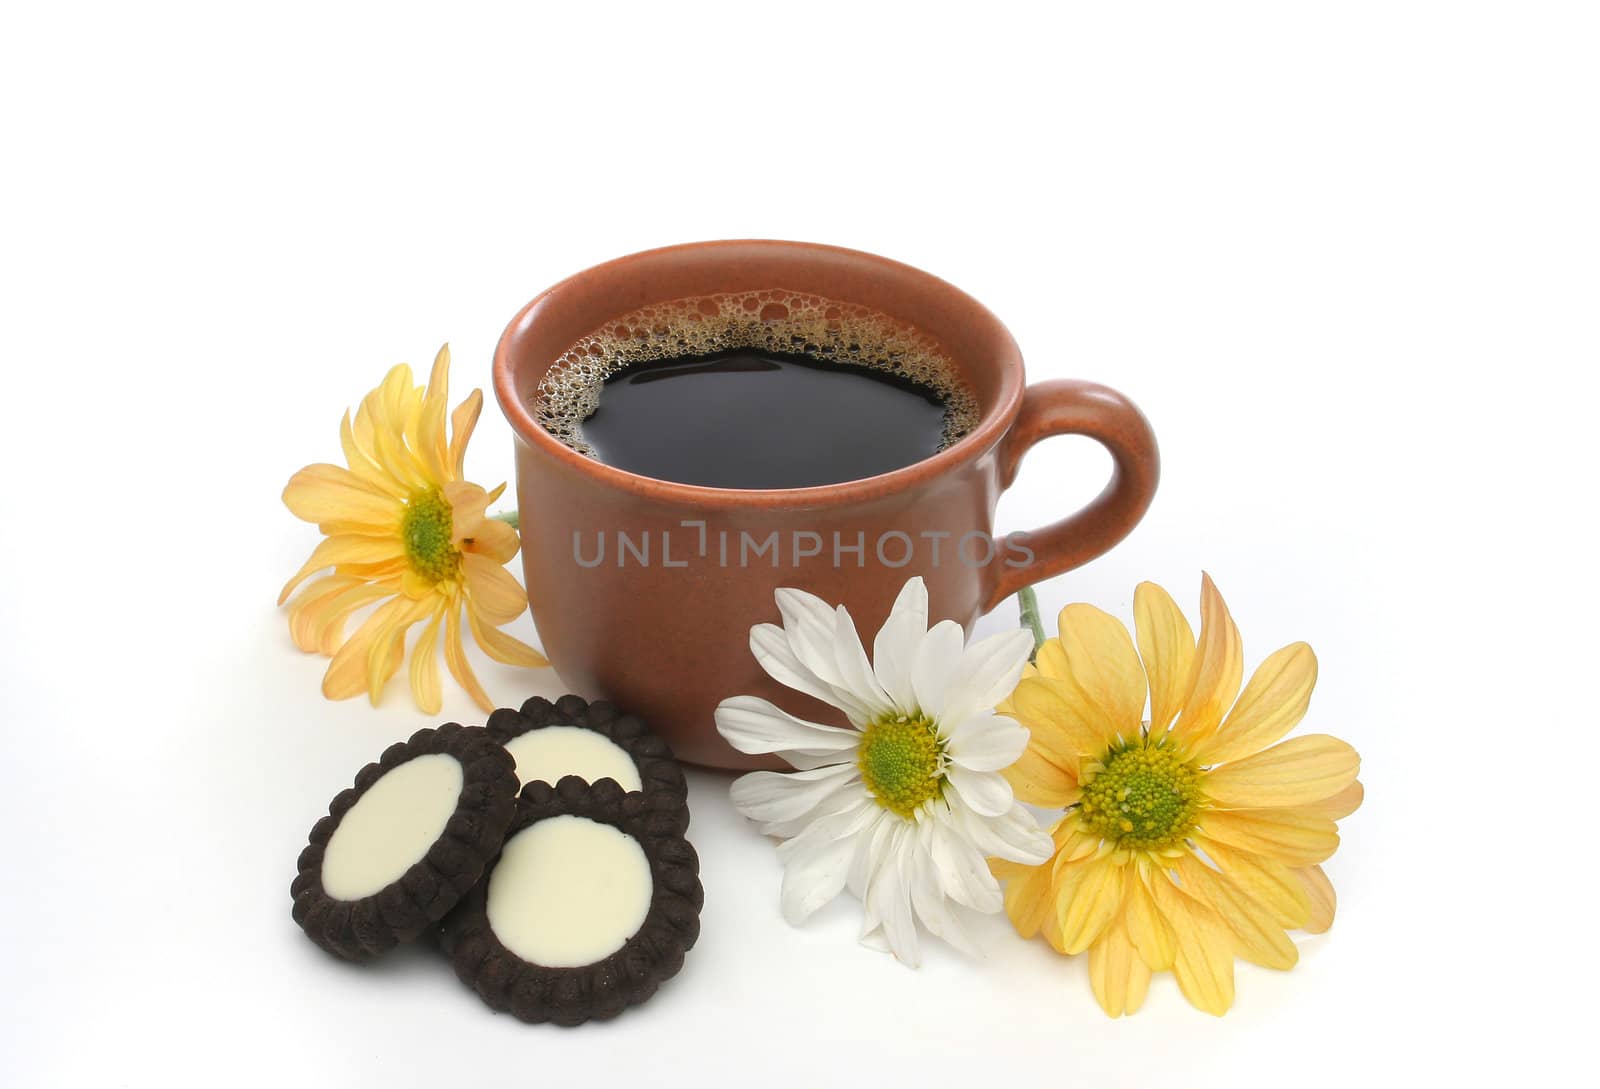 A beautiful coffee breakfast with cookies and flowers.  Look at my gallery for more delicious meals